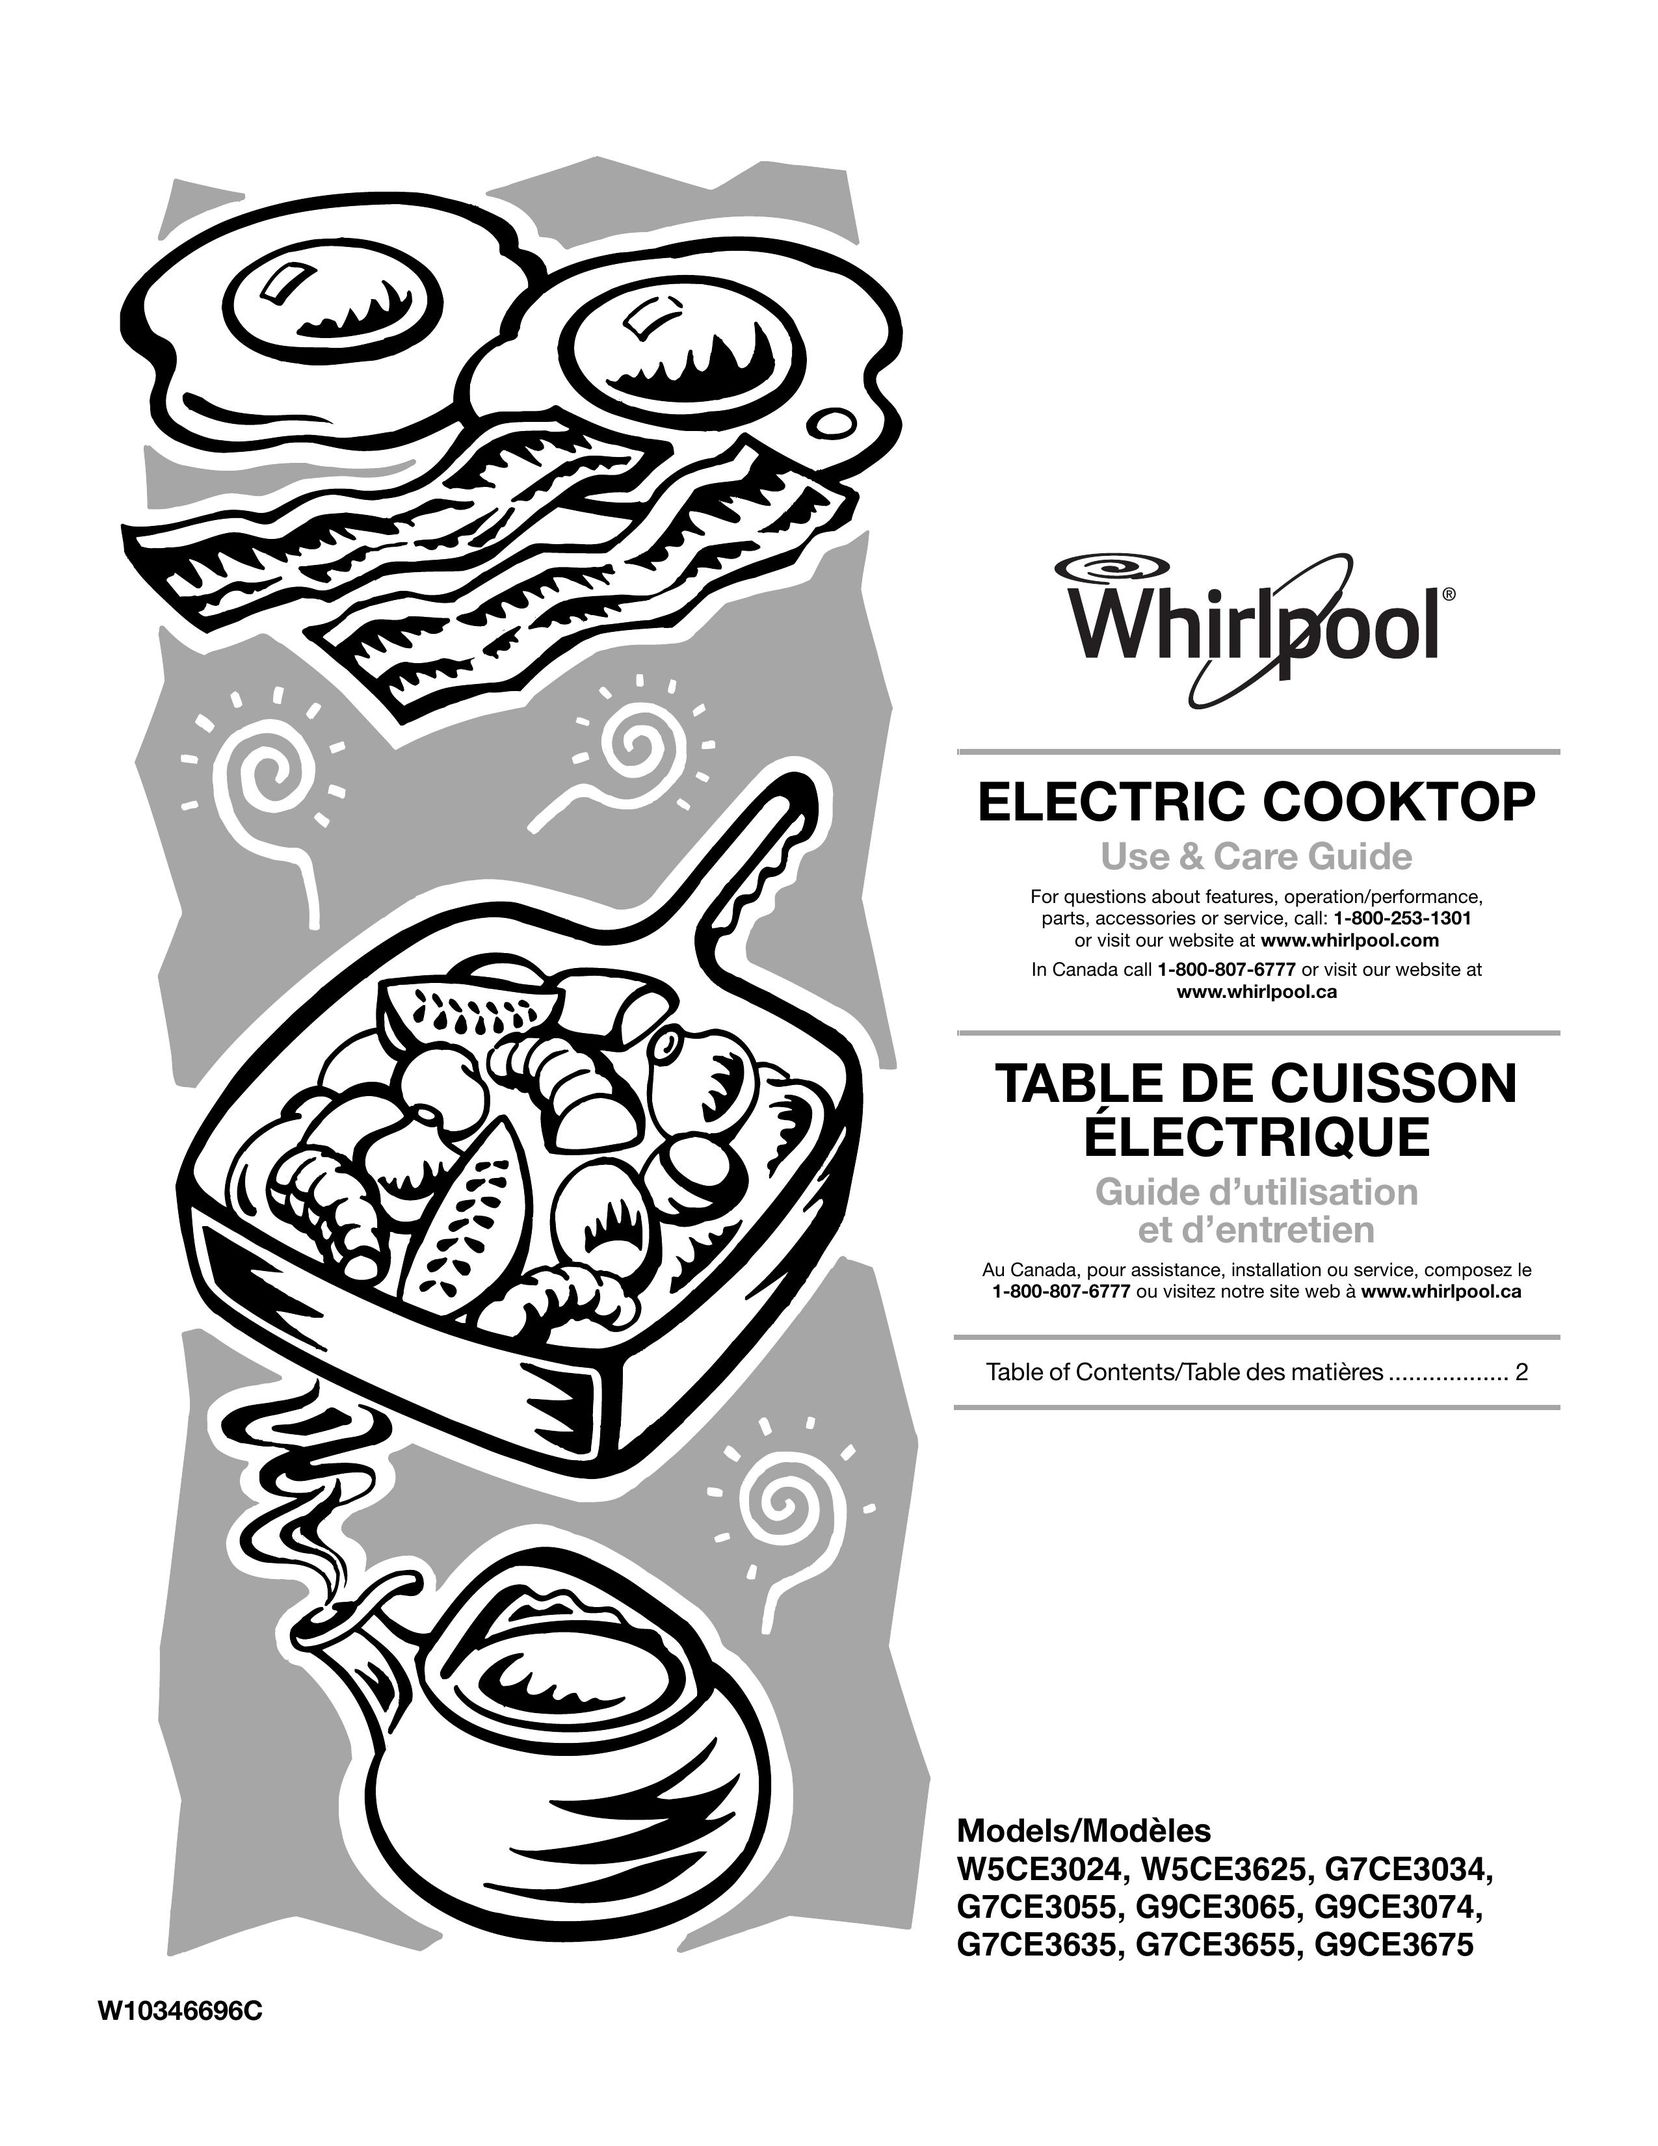 Whirlpool G7CE3635XB Cooktop User Manual